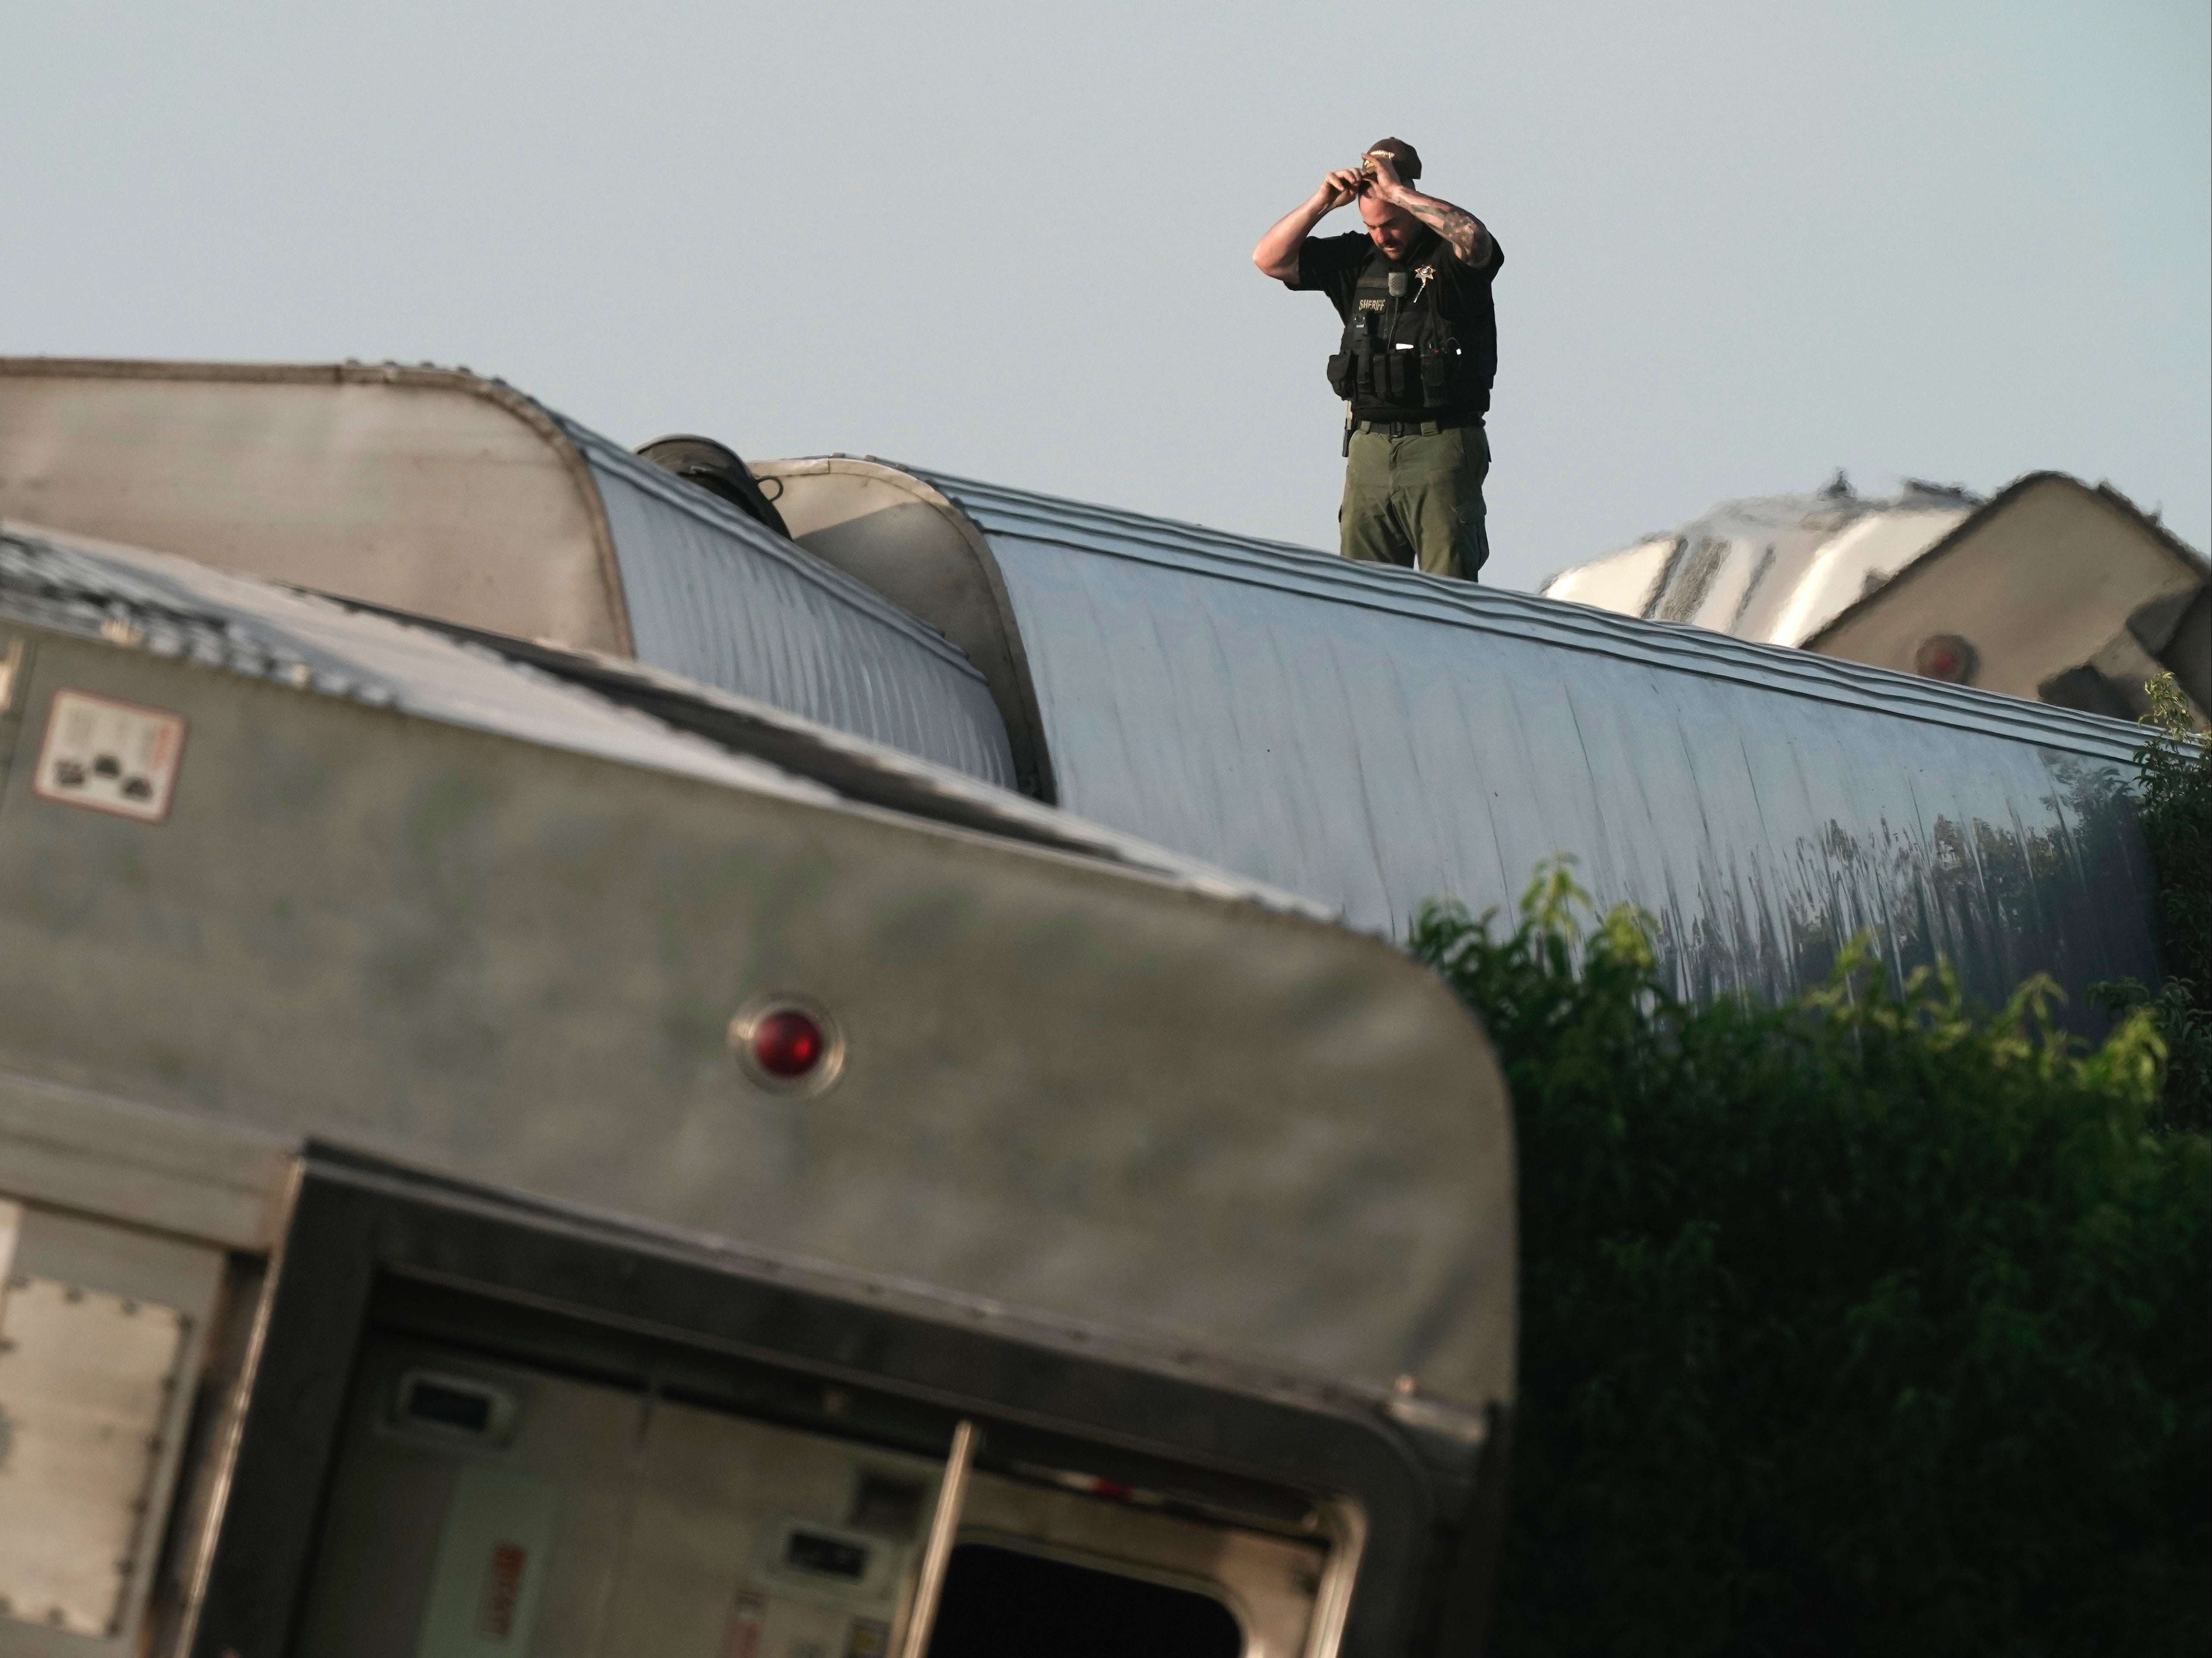 A law enforcement officer inspecting the scene of the Amtrak train derailment